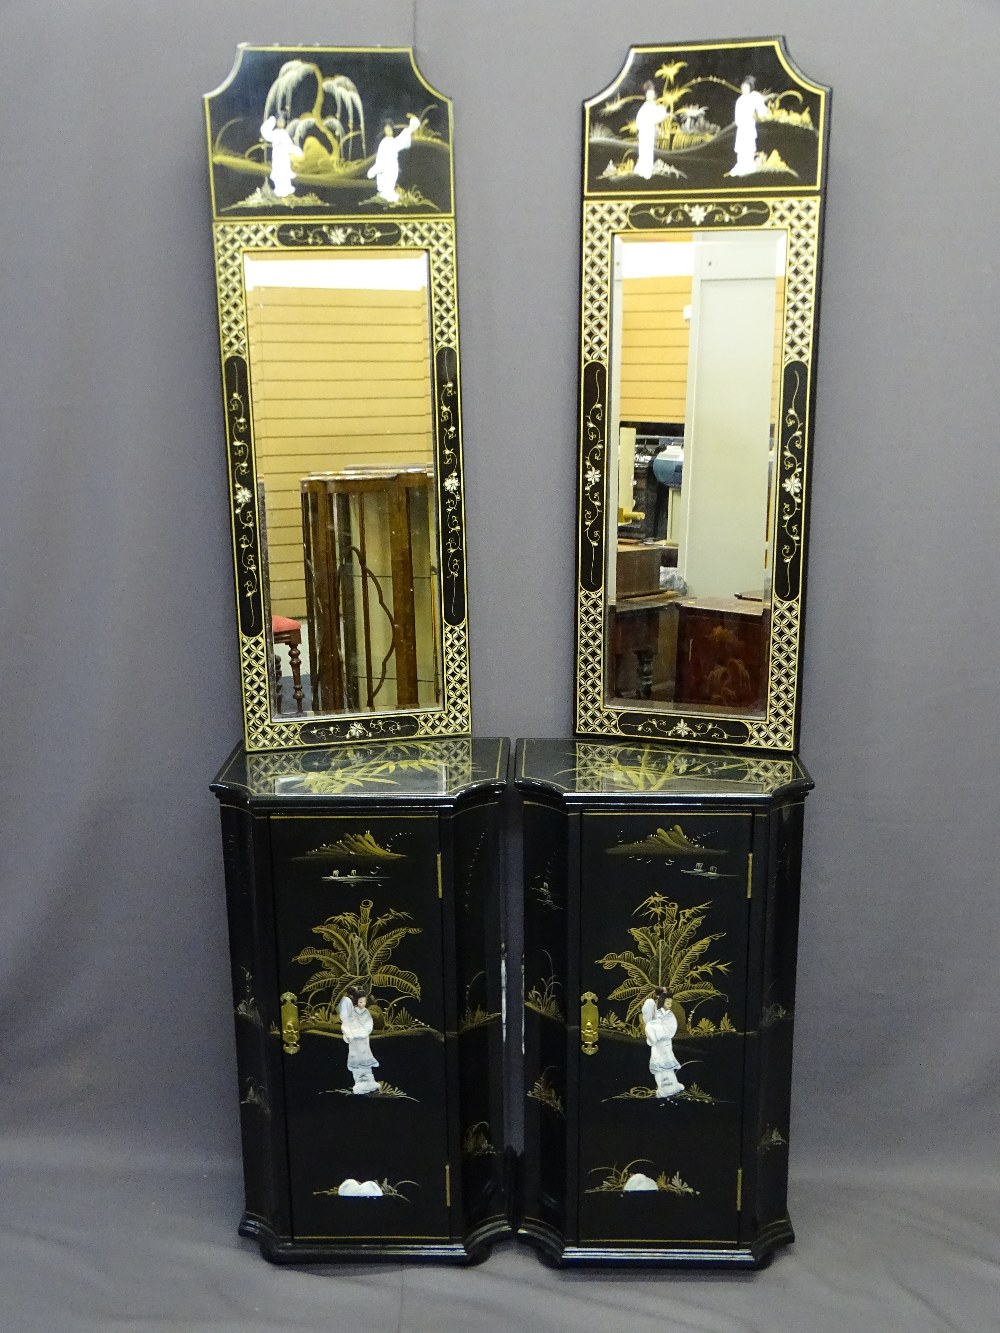 JAPANESE LACQUER WORK SINGLE DOOR CABINET & MIRROR ENSEMBLE, a pair, the cabinets with inverted